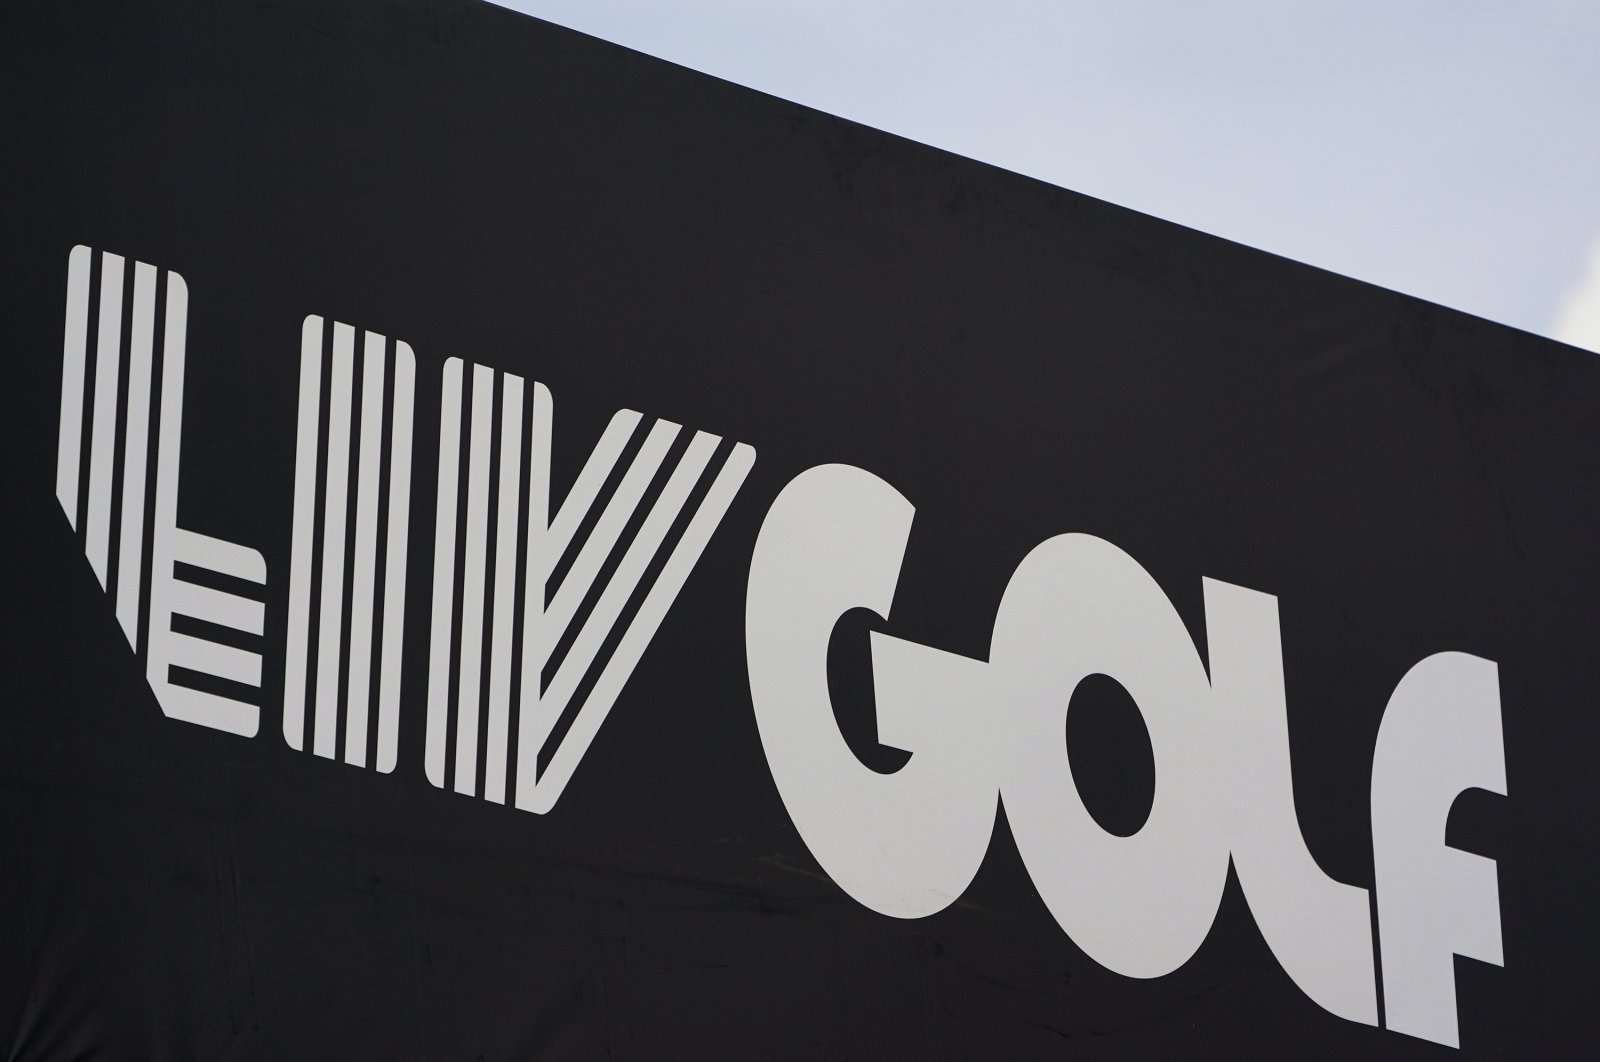 Signage for LIV Golf is displayed during Bedminster Invitational, Bedminster, New Jersey, U.S., July 28, 2022. (AP Photo)